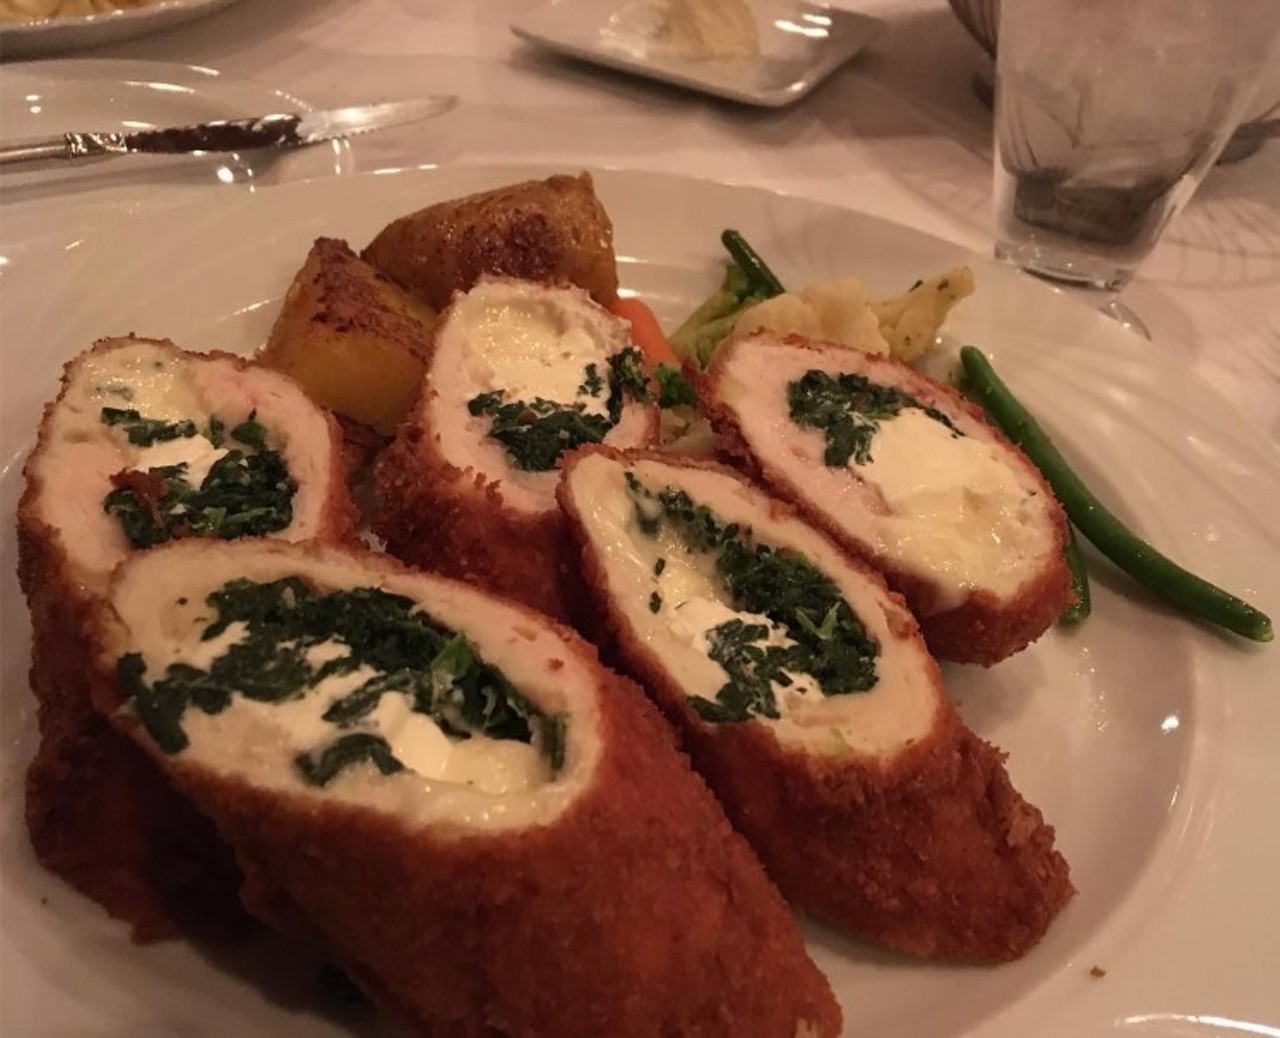 The Grbic family takes mainstay dishes and infuses them with an air of sophistication expected at an upscale restaurant. Stop in for stuffed cabbage, cauliflower schnitzel or goulash and get to know this important side of St. Louis history. Photo courtesy of Instagram / stl_lee_314.